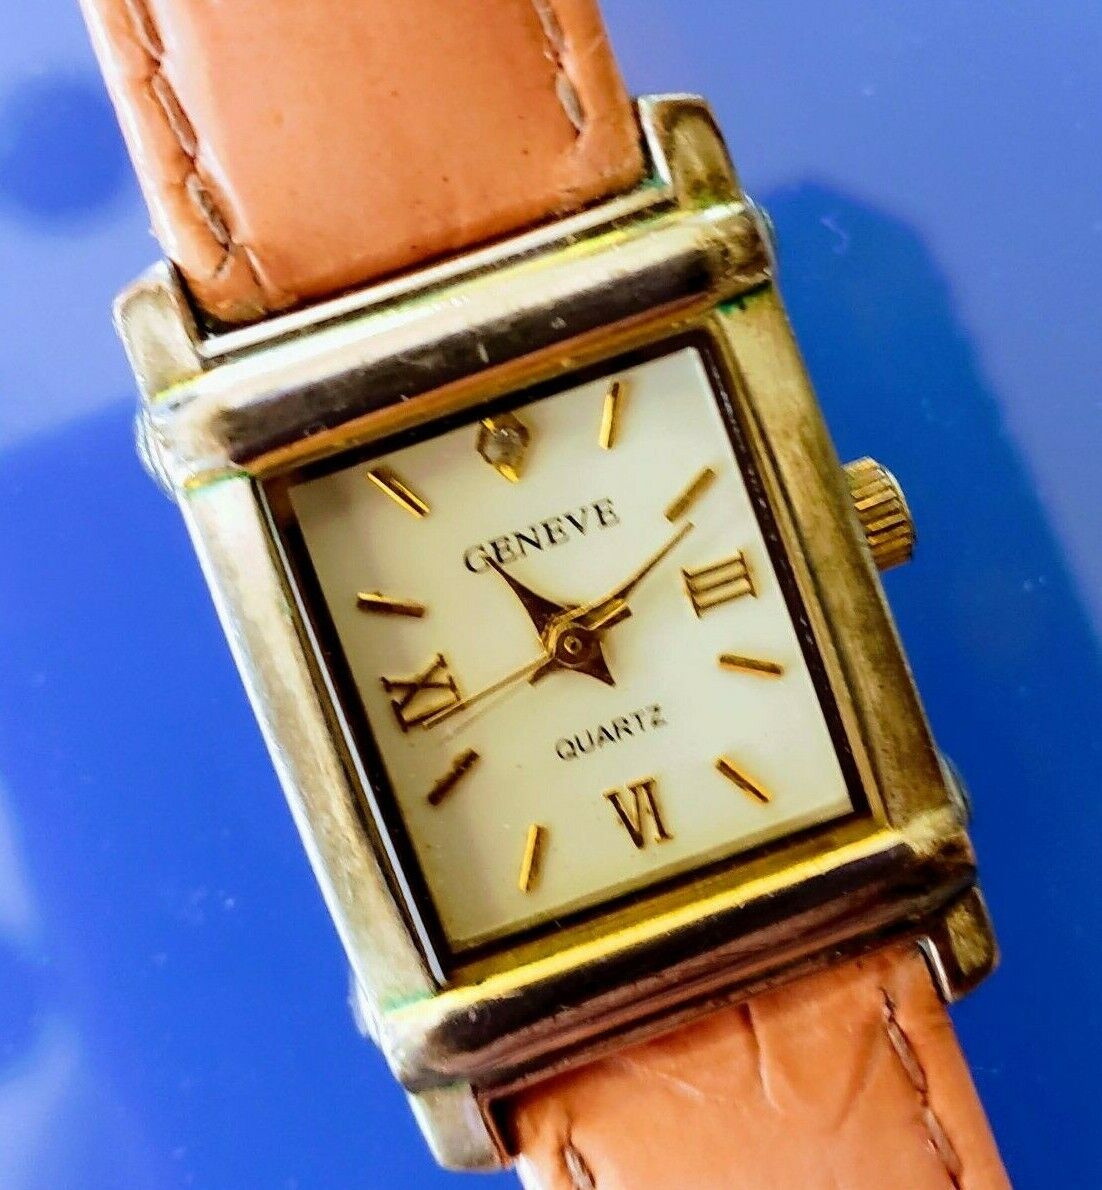 Geneve Ladies Watch w/Pink Leather Band, Vintage, Works Great w/New Battery